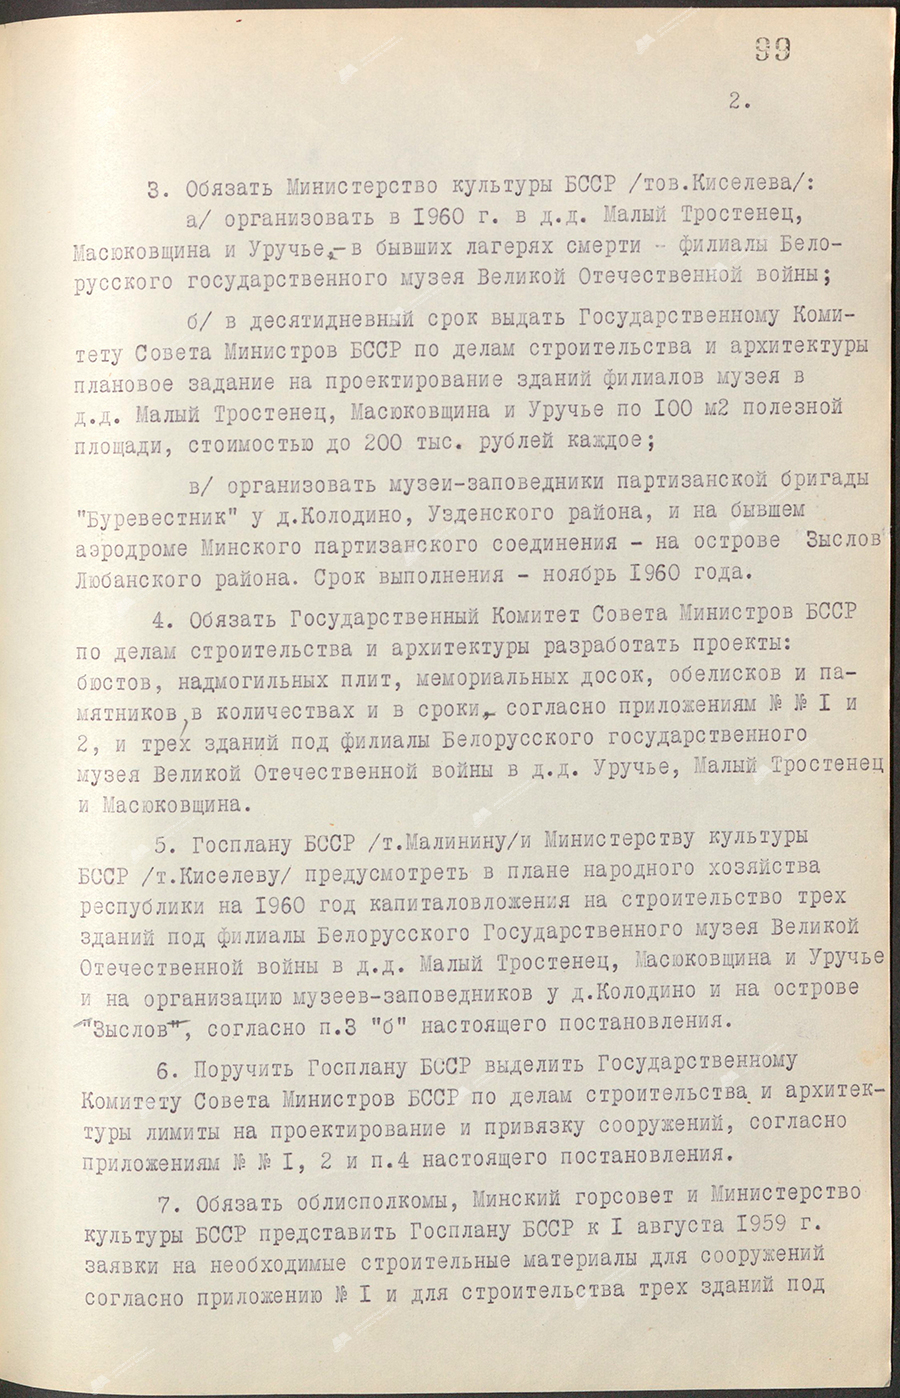 Resolution No. 248 of the Council of Ministers of the BSSR «On the improvement of burial places of soldiers of the Soviet Army, partisans and civilians who died in 1941 - 1945.» and on the perpetuation of significant places and events associated with the Great Patriotic War on the territory of the Belarusian SSR»-стр. 1